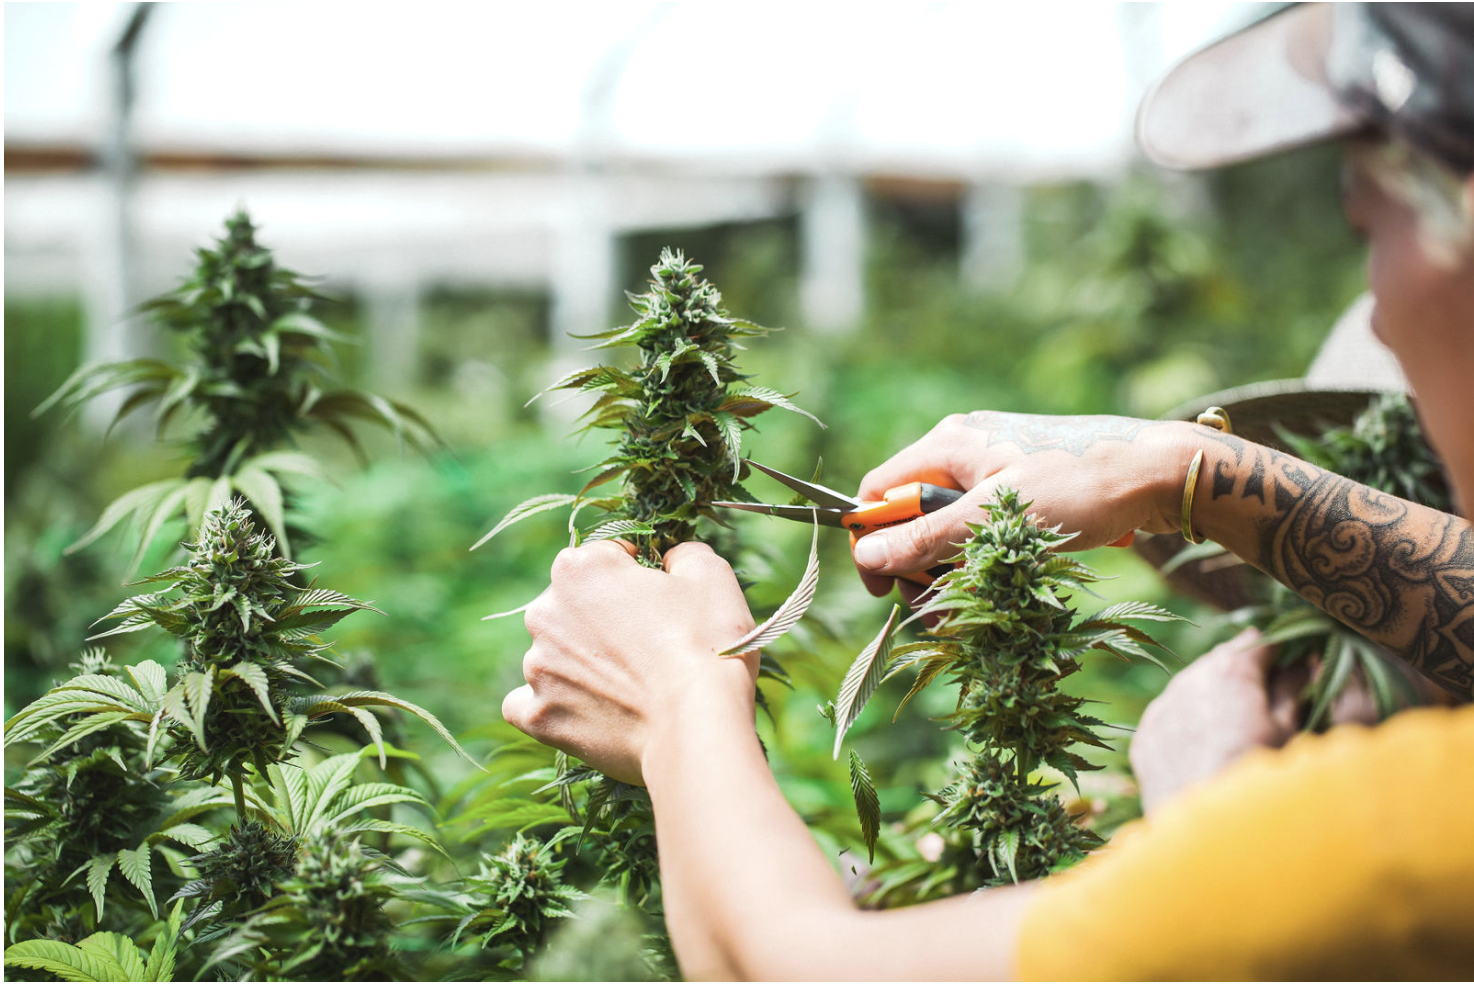  A person’s hands trimming a bud still connected to the cannabis plant. 